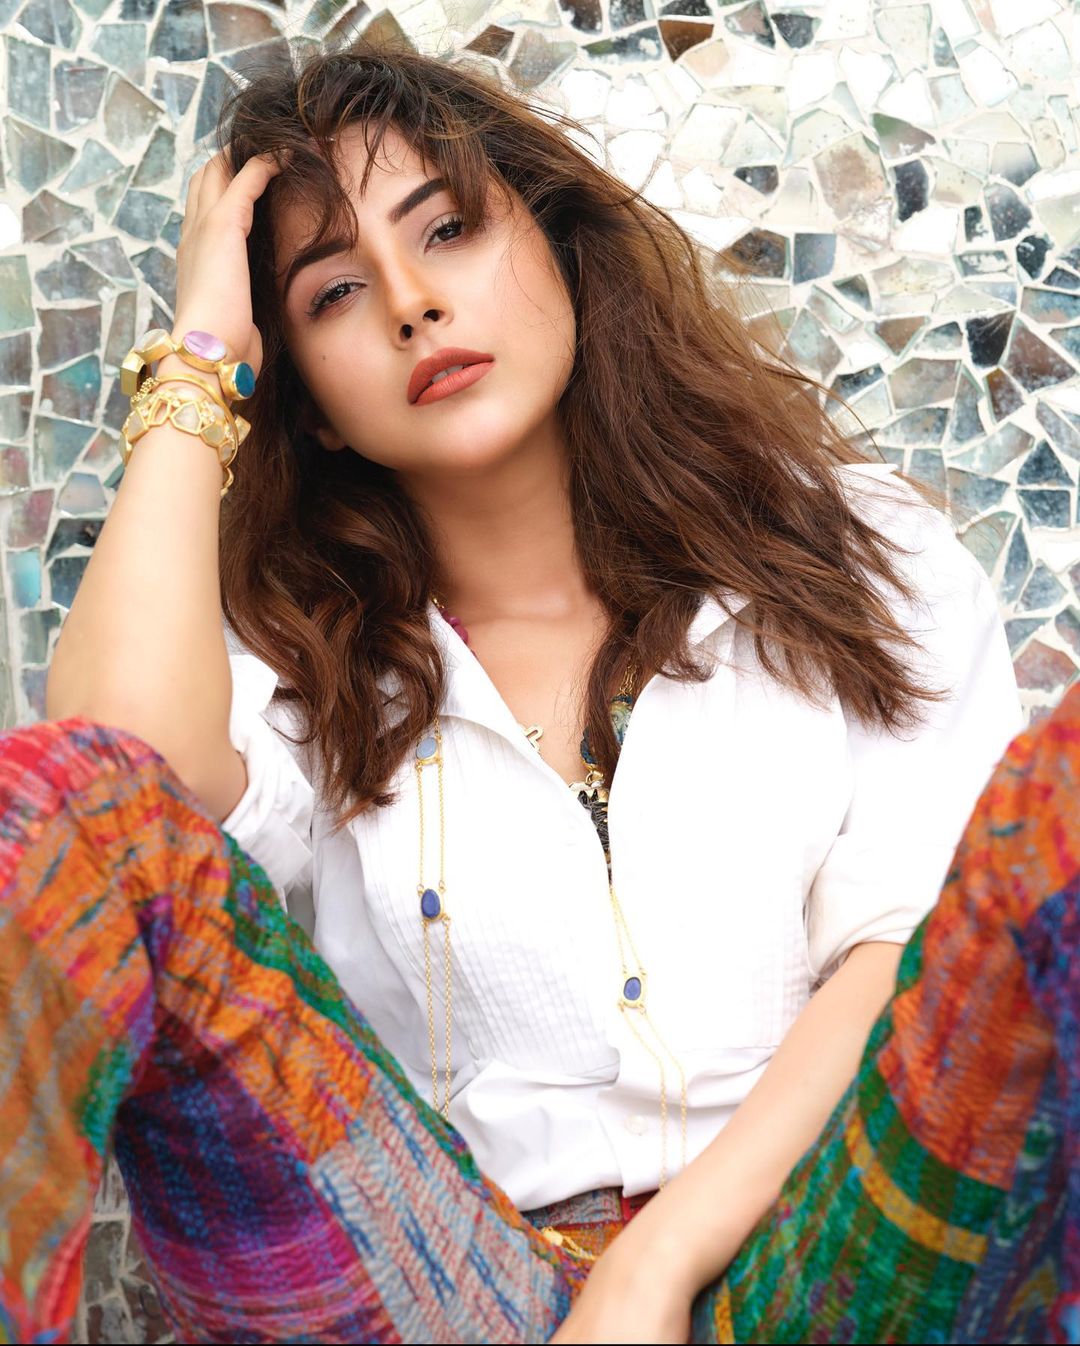 Shahnaz Gill shared new pictures from Dabboo Ratnani calendar photoshoot wrote Life is like a rainbow